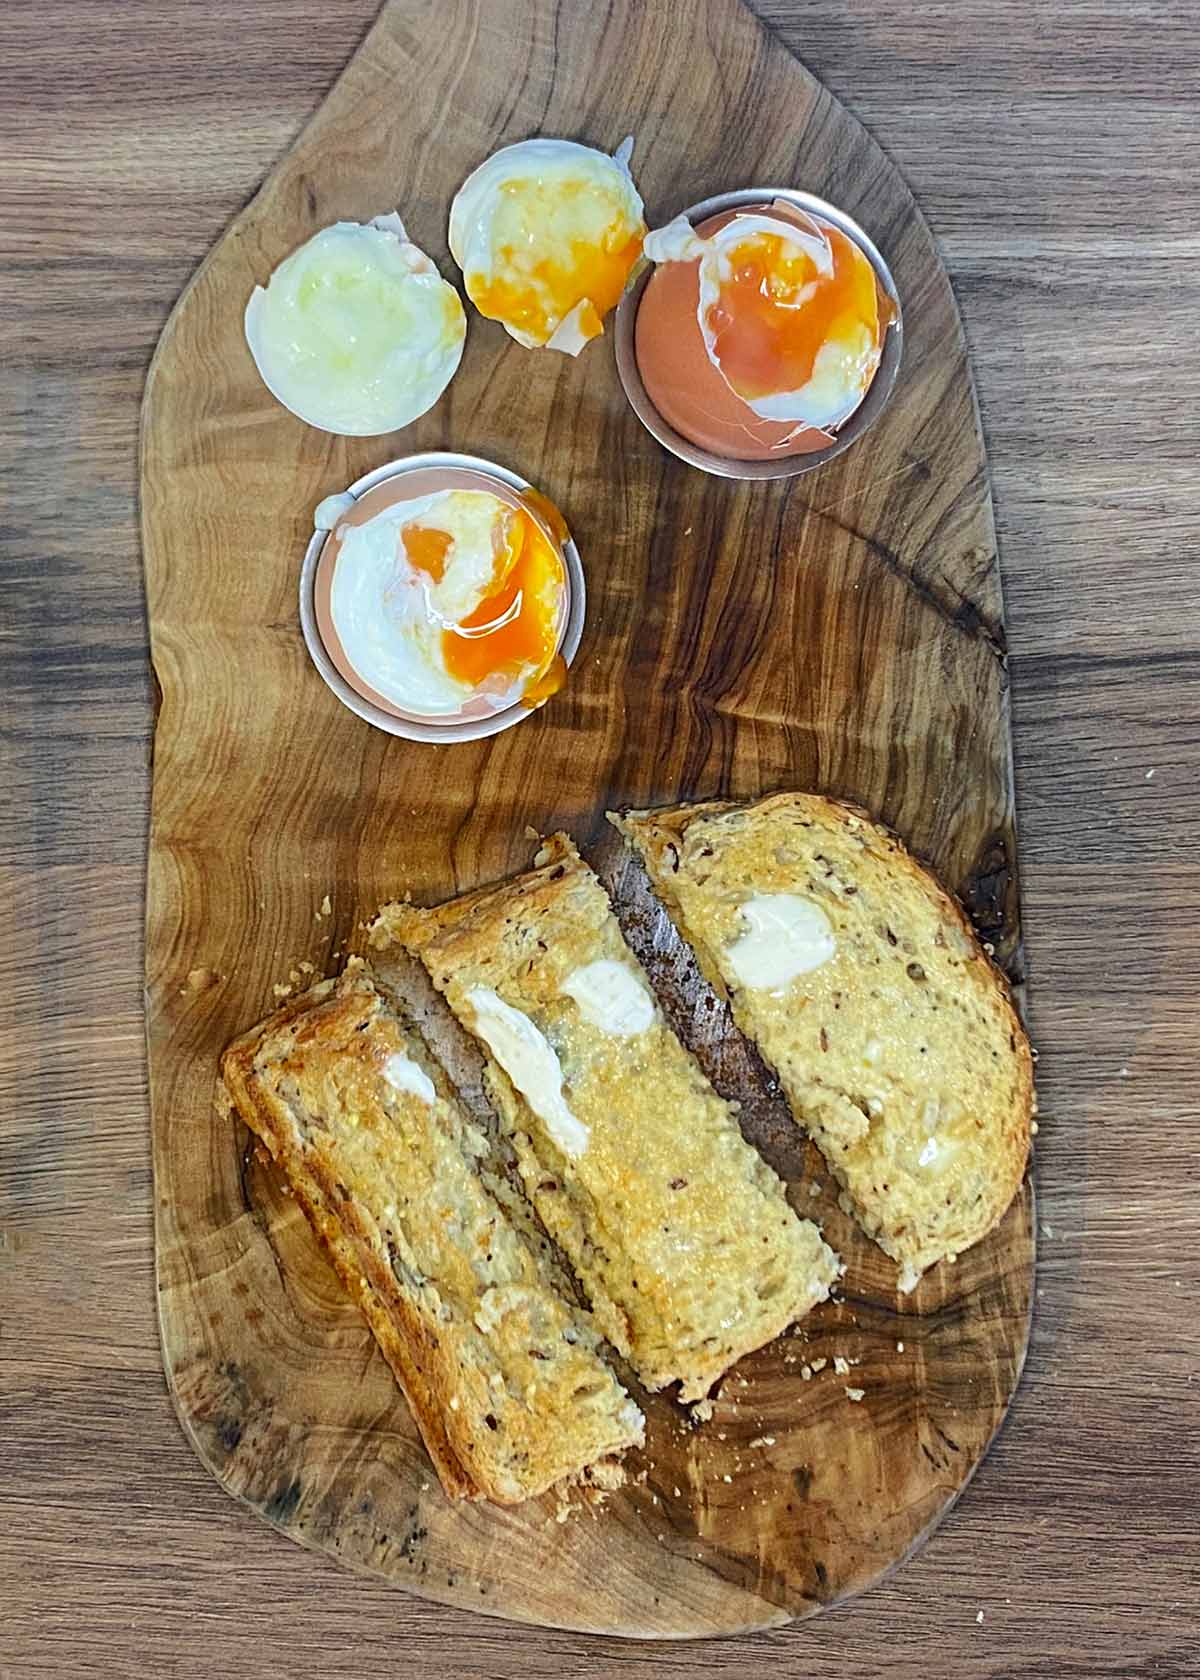 Two soft boiled eggs with the tops removed next to some sliced toast.